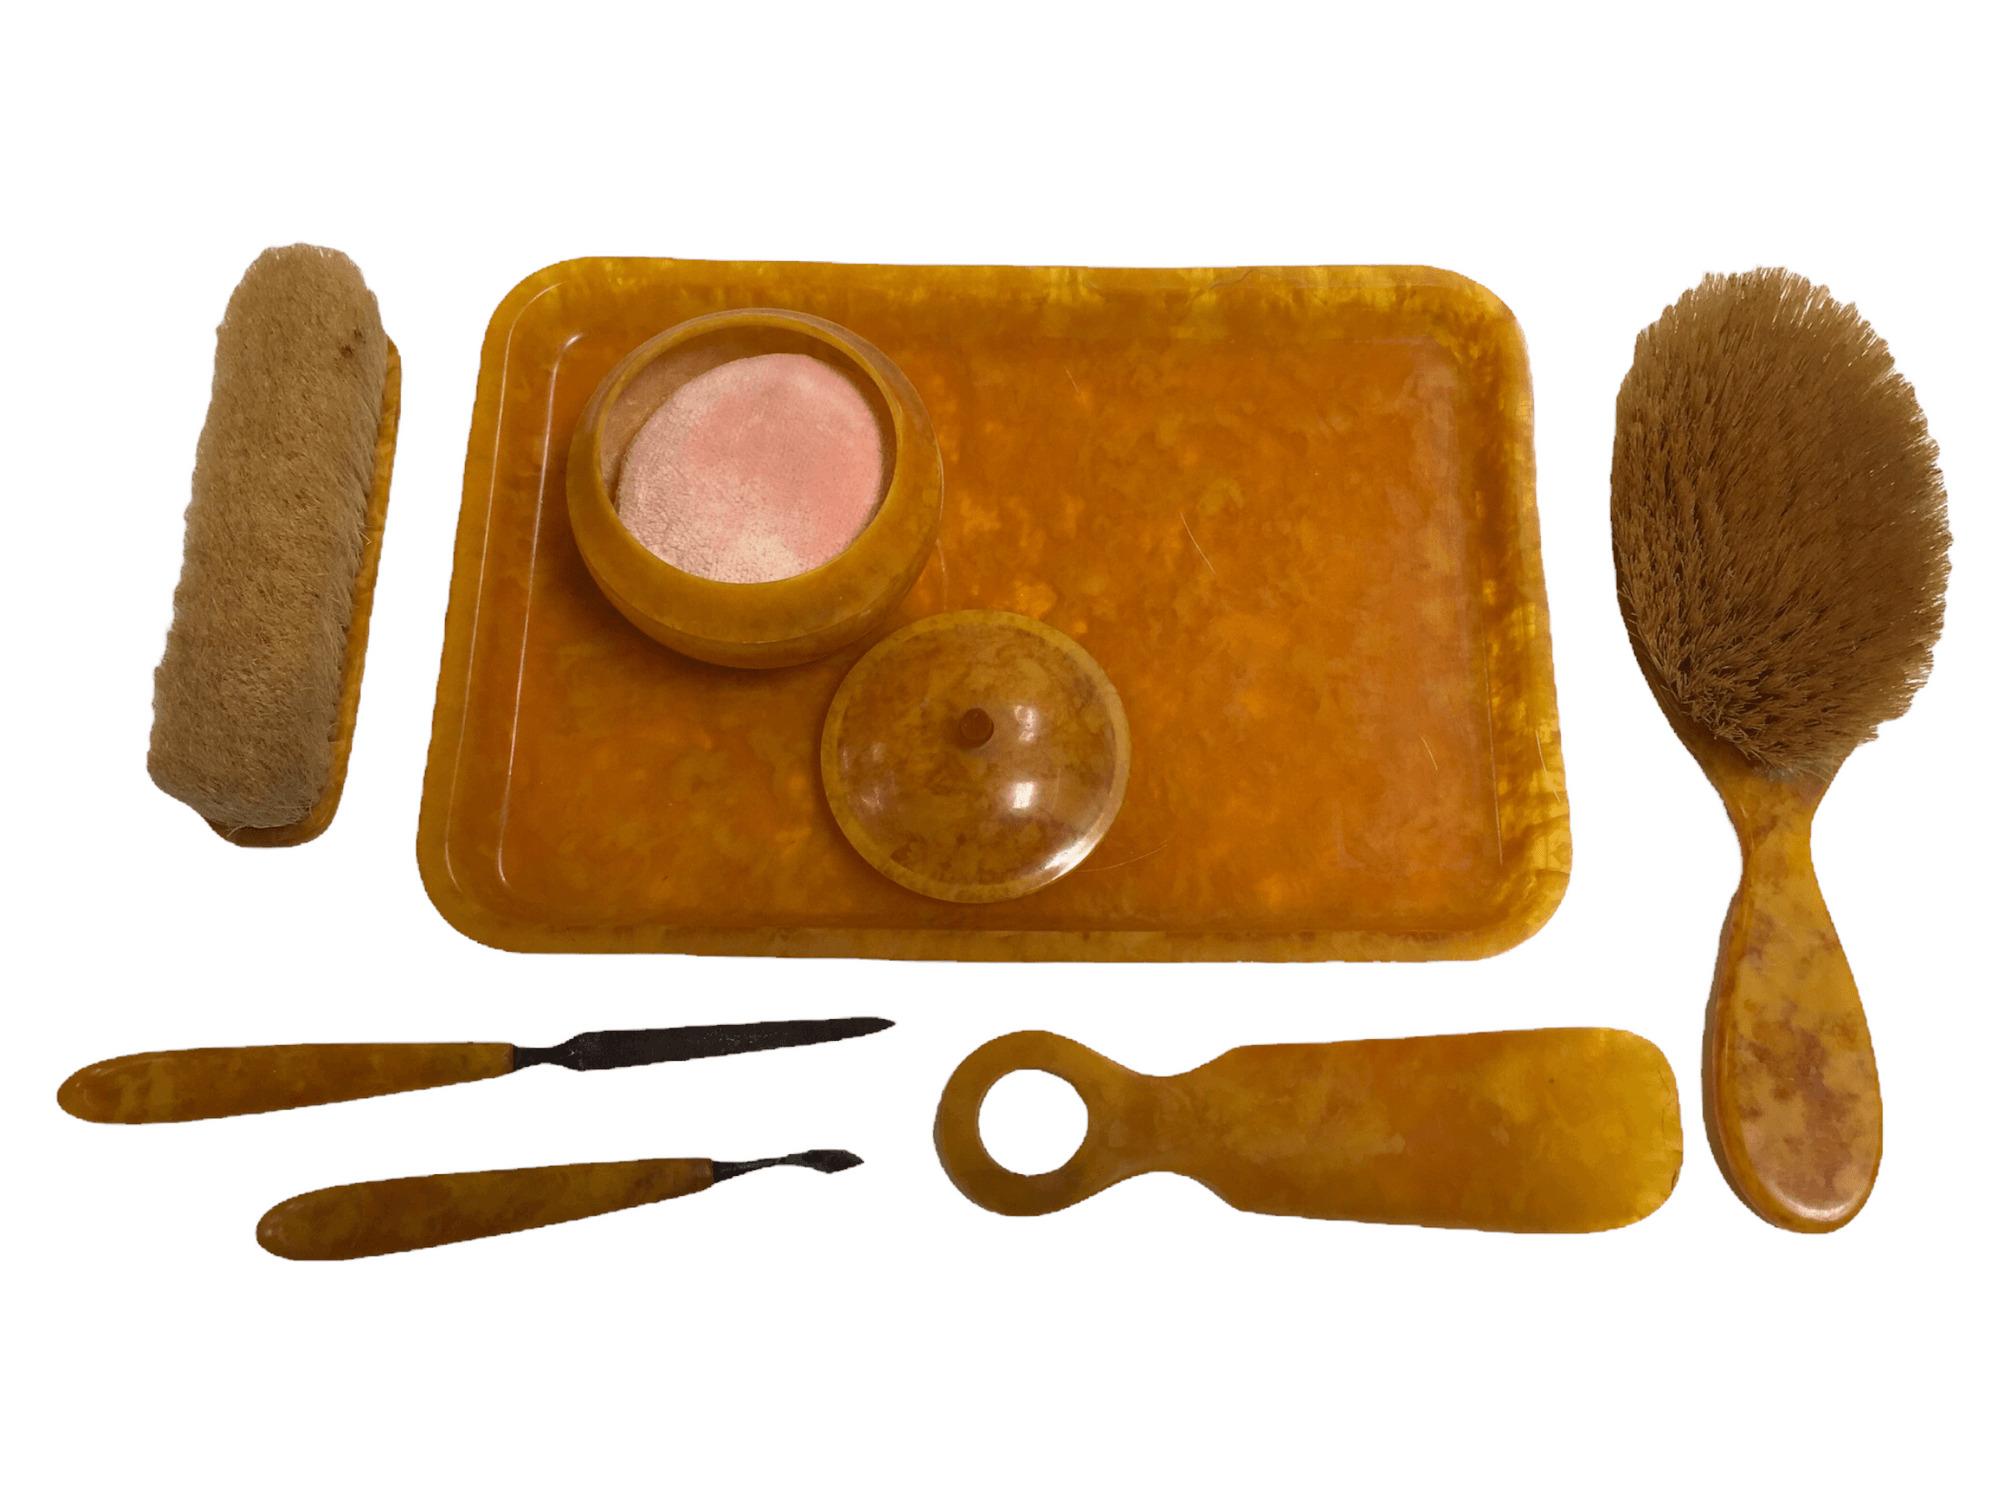 Vintage Bakelite Vanity set with tray, brushes, powder box, nail file and more. $135
 
Every single piece in this set is in great condition. Made out of bakelite, it features a nice marbled yellow-orange pattern. Slight signs of use, but no dents,